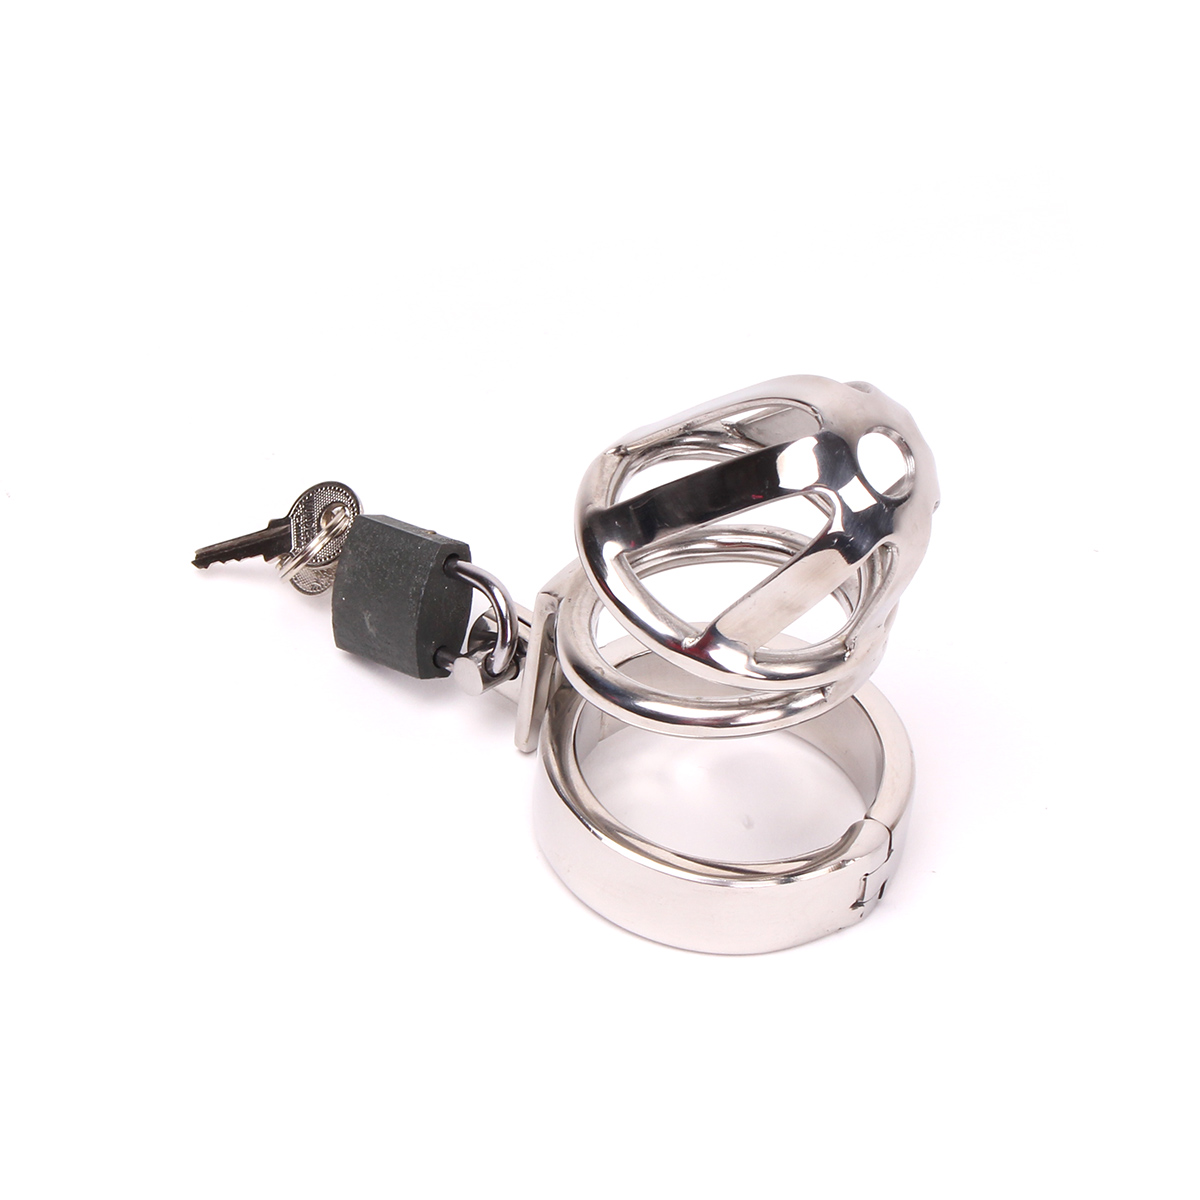 Chastity-Cage-Small-Steel-OPR-277030-3